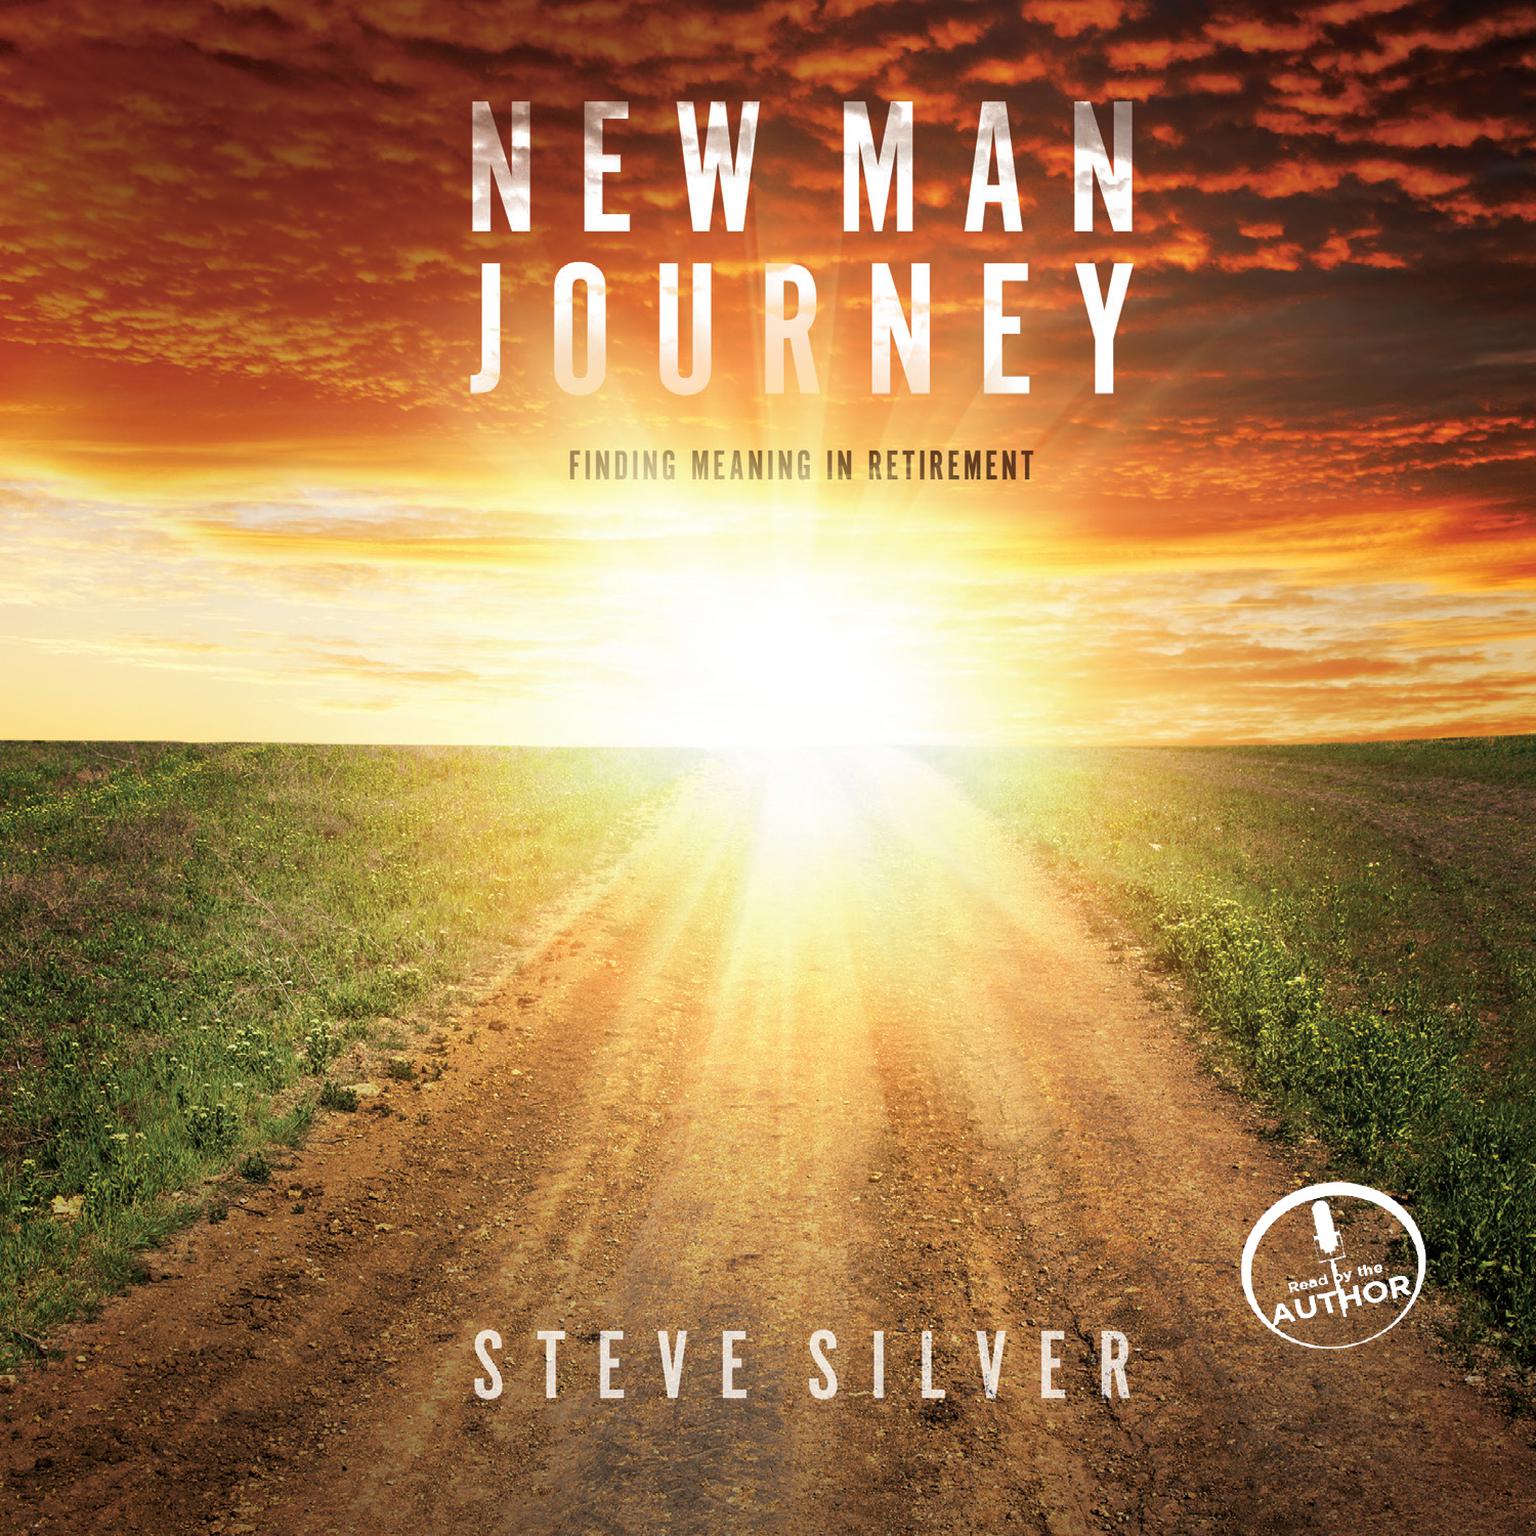 New Man Journey: Finding Meaning in Retirement Audiobook, by Steve Silver